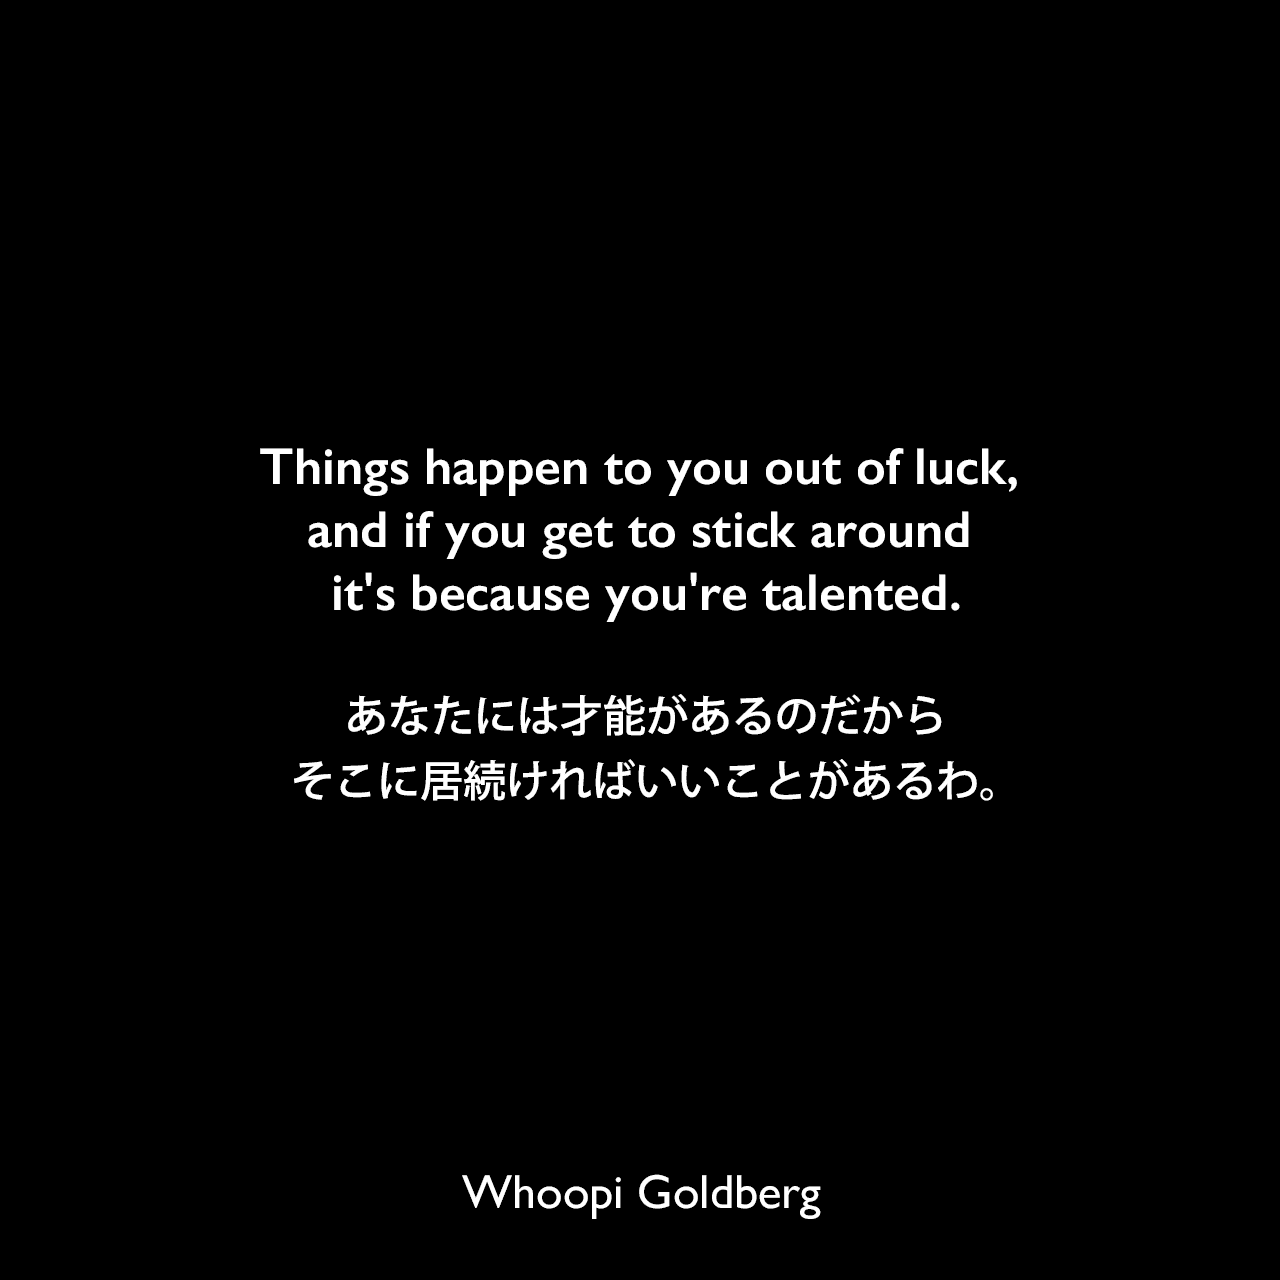 Things happen to you out of luck, and if you get to stick around it's because you're talented.あなたには才能があるのだから、そこに居続ければいいことがあるわ。Whoopi Goldberg